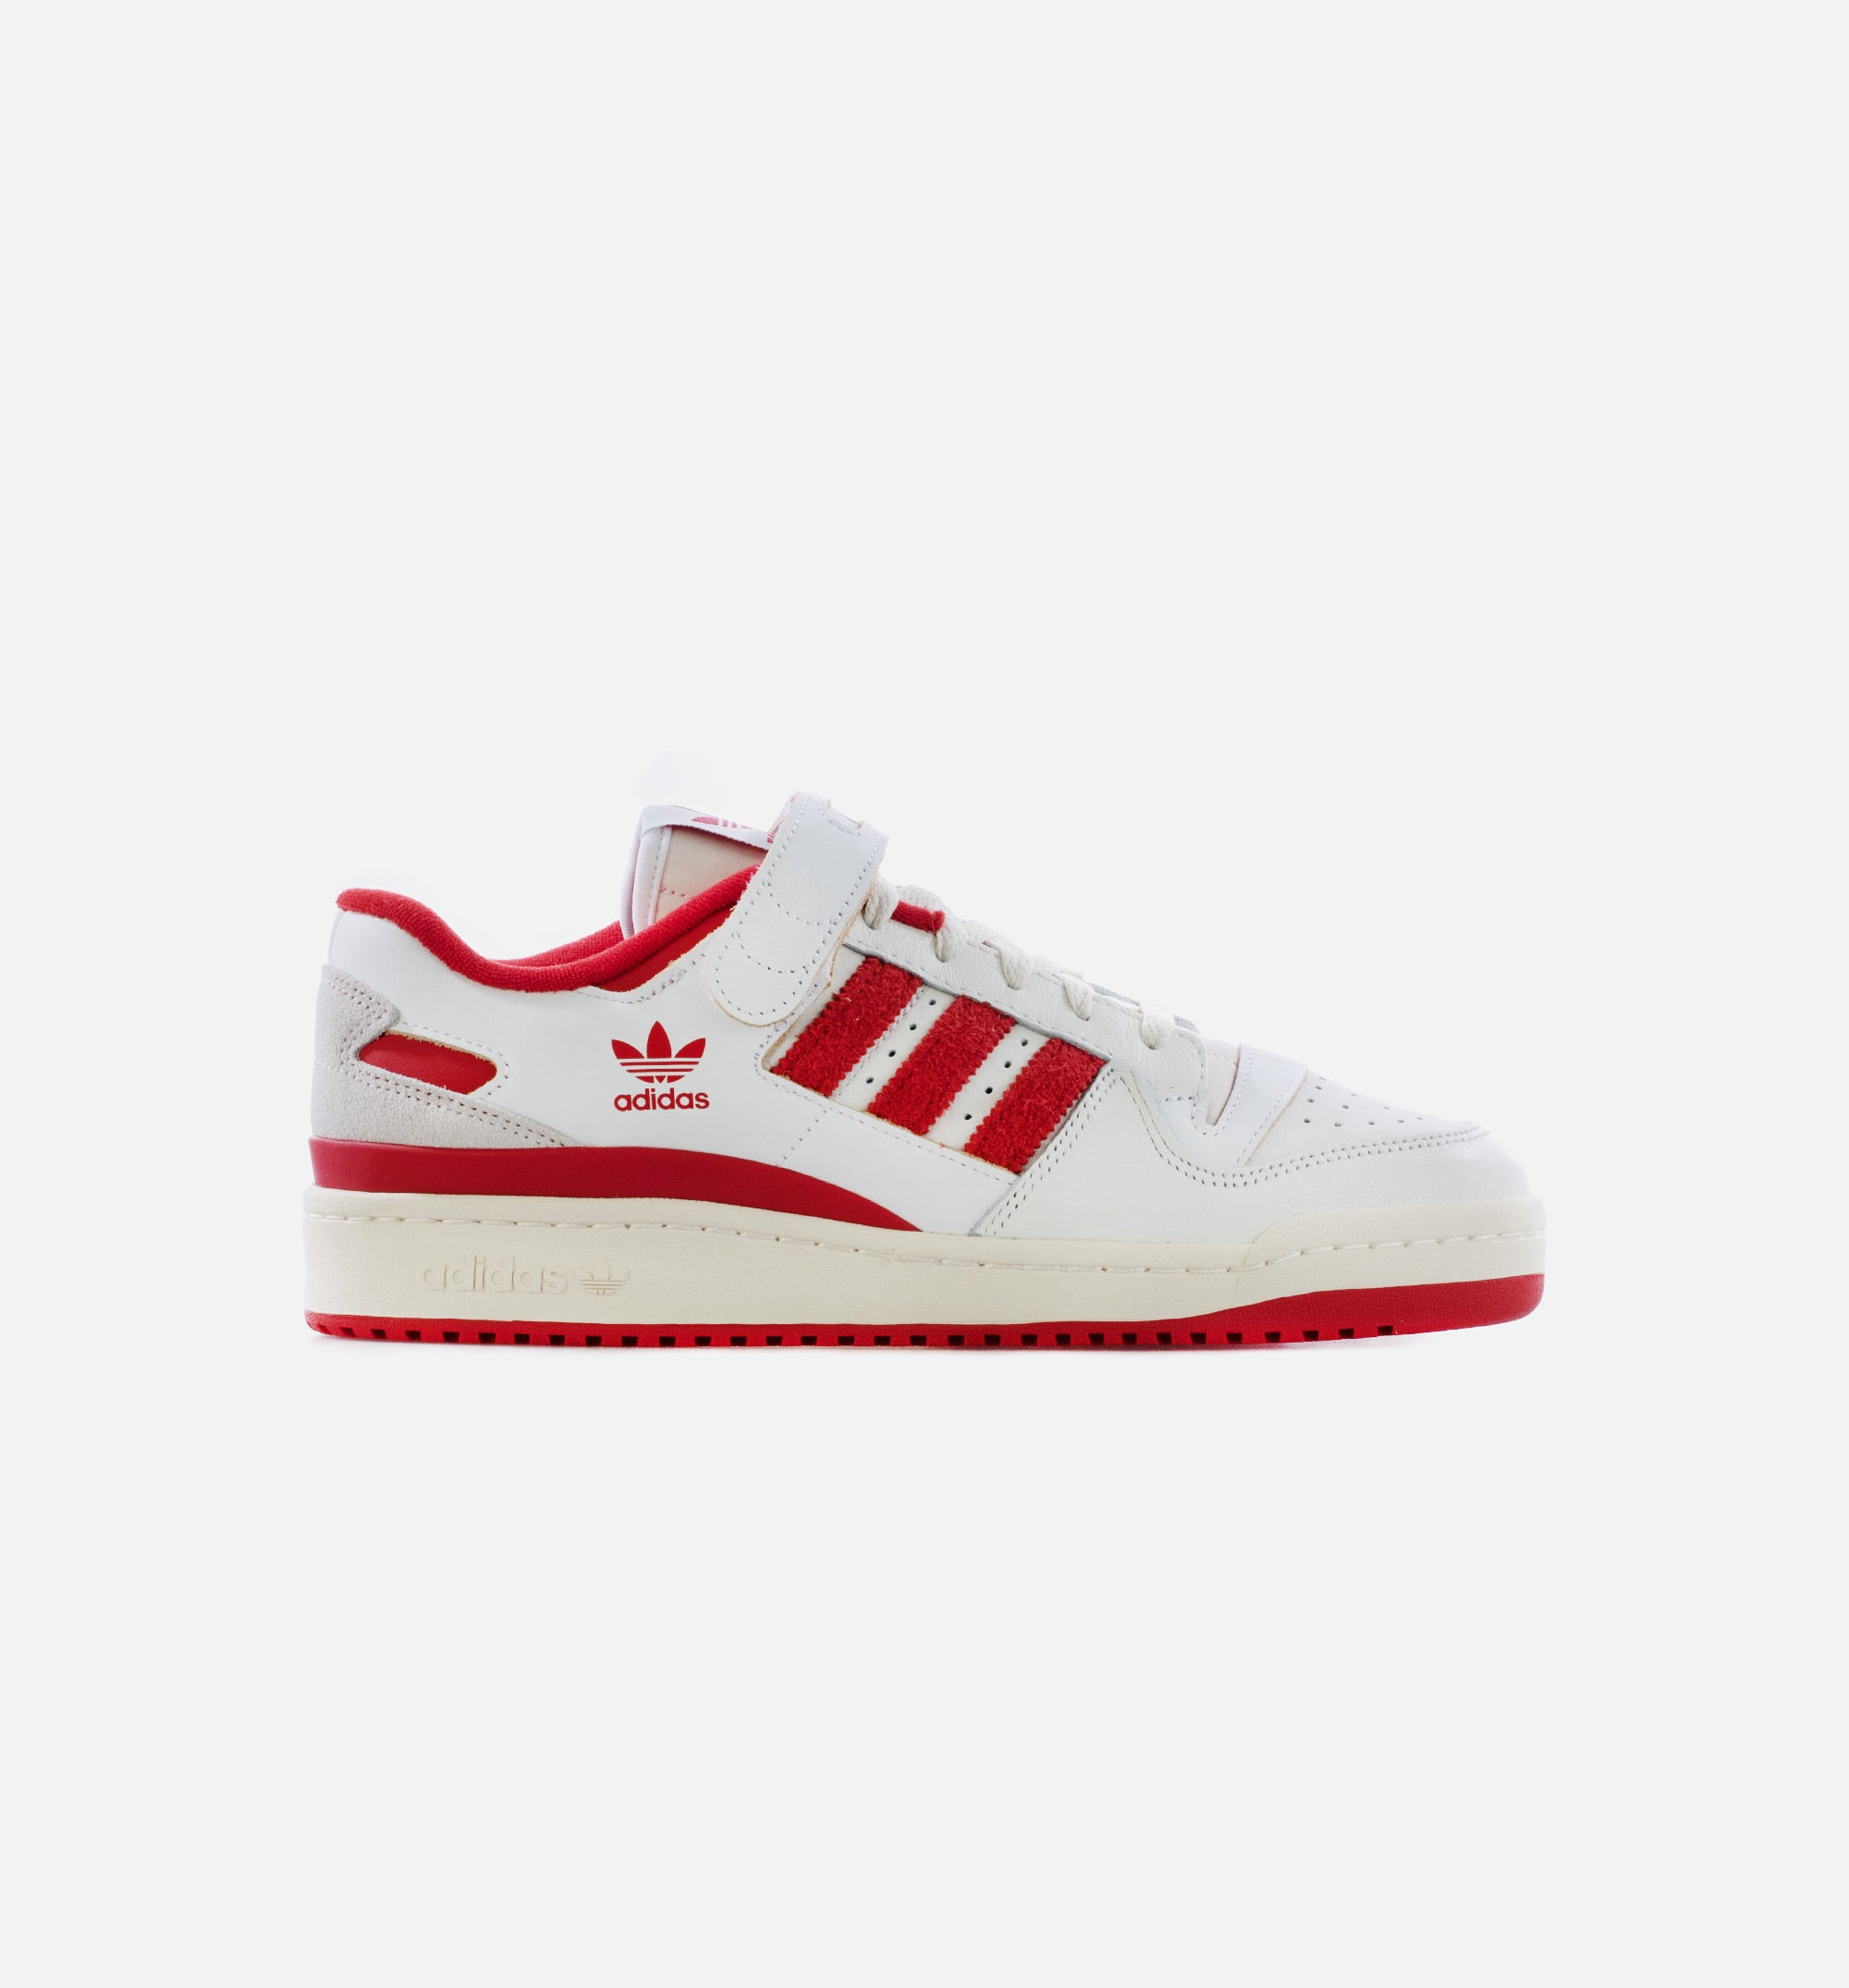 adidas GY6981 Forum 84 Low Mens Lifestyle Shoe - White/Red